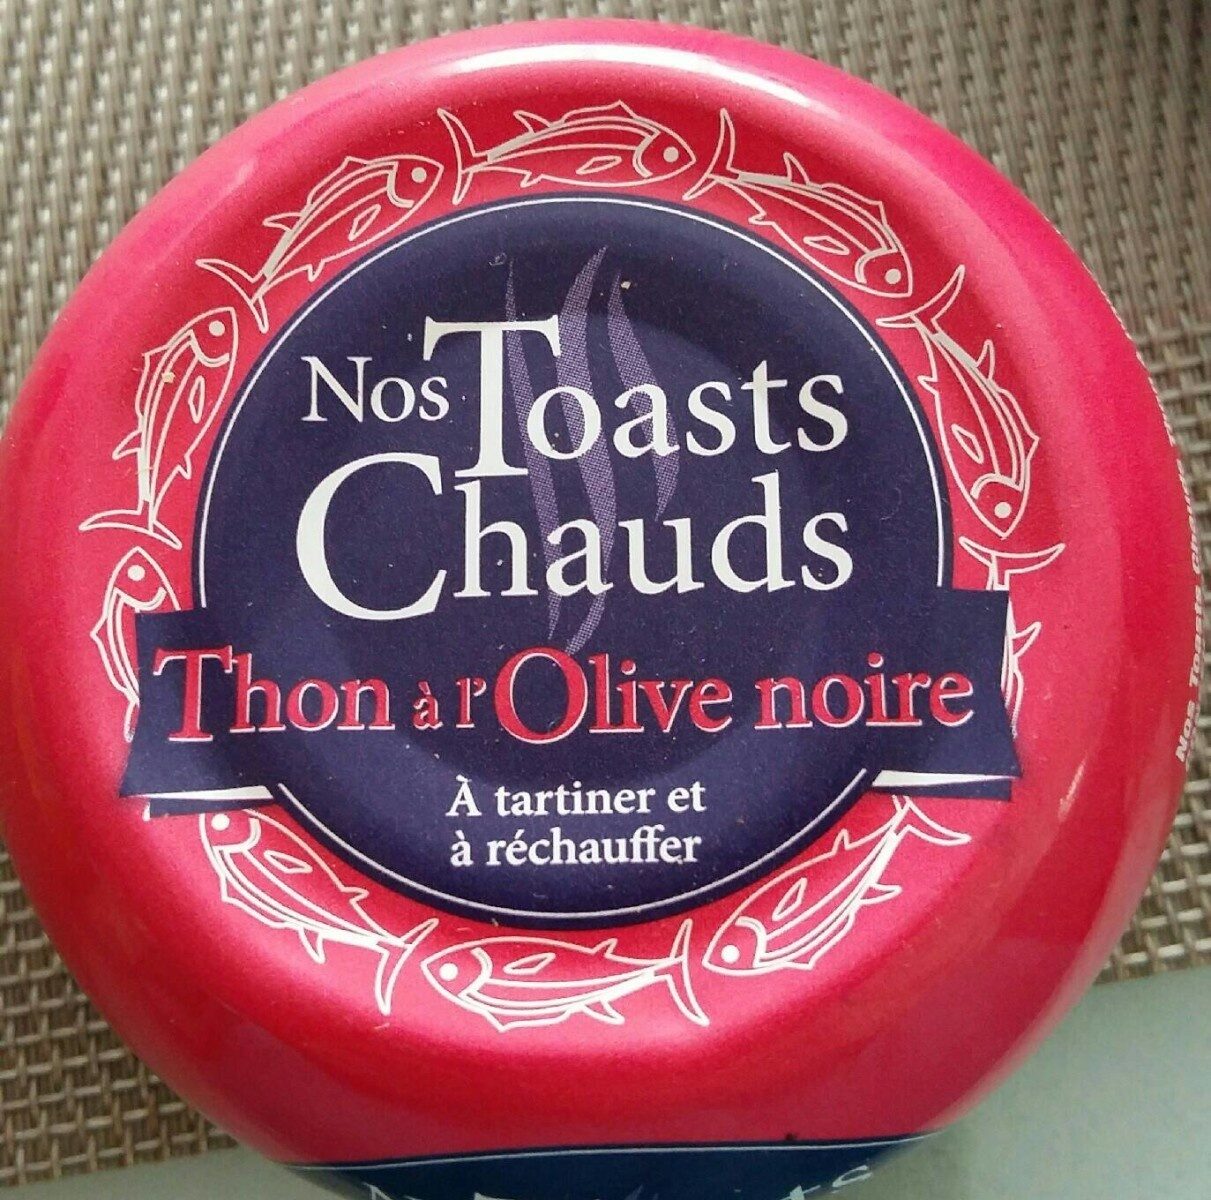 Nos toasts chauds - Product - fr